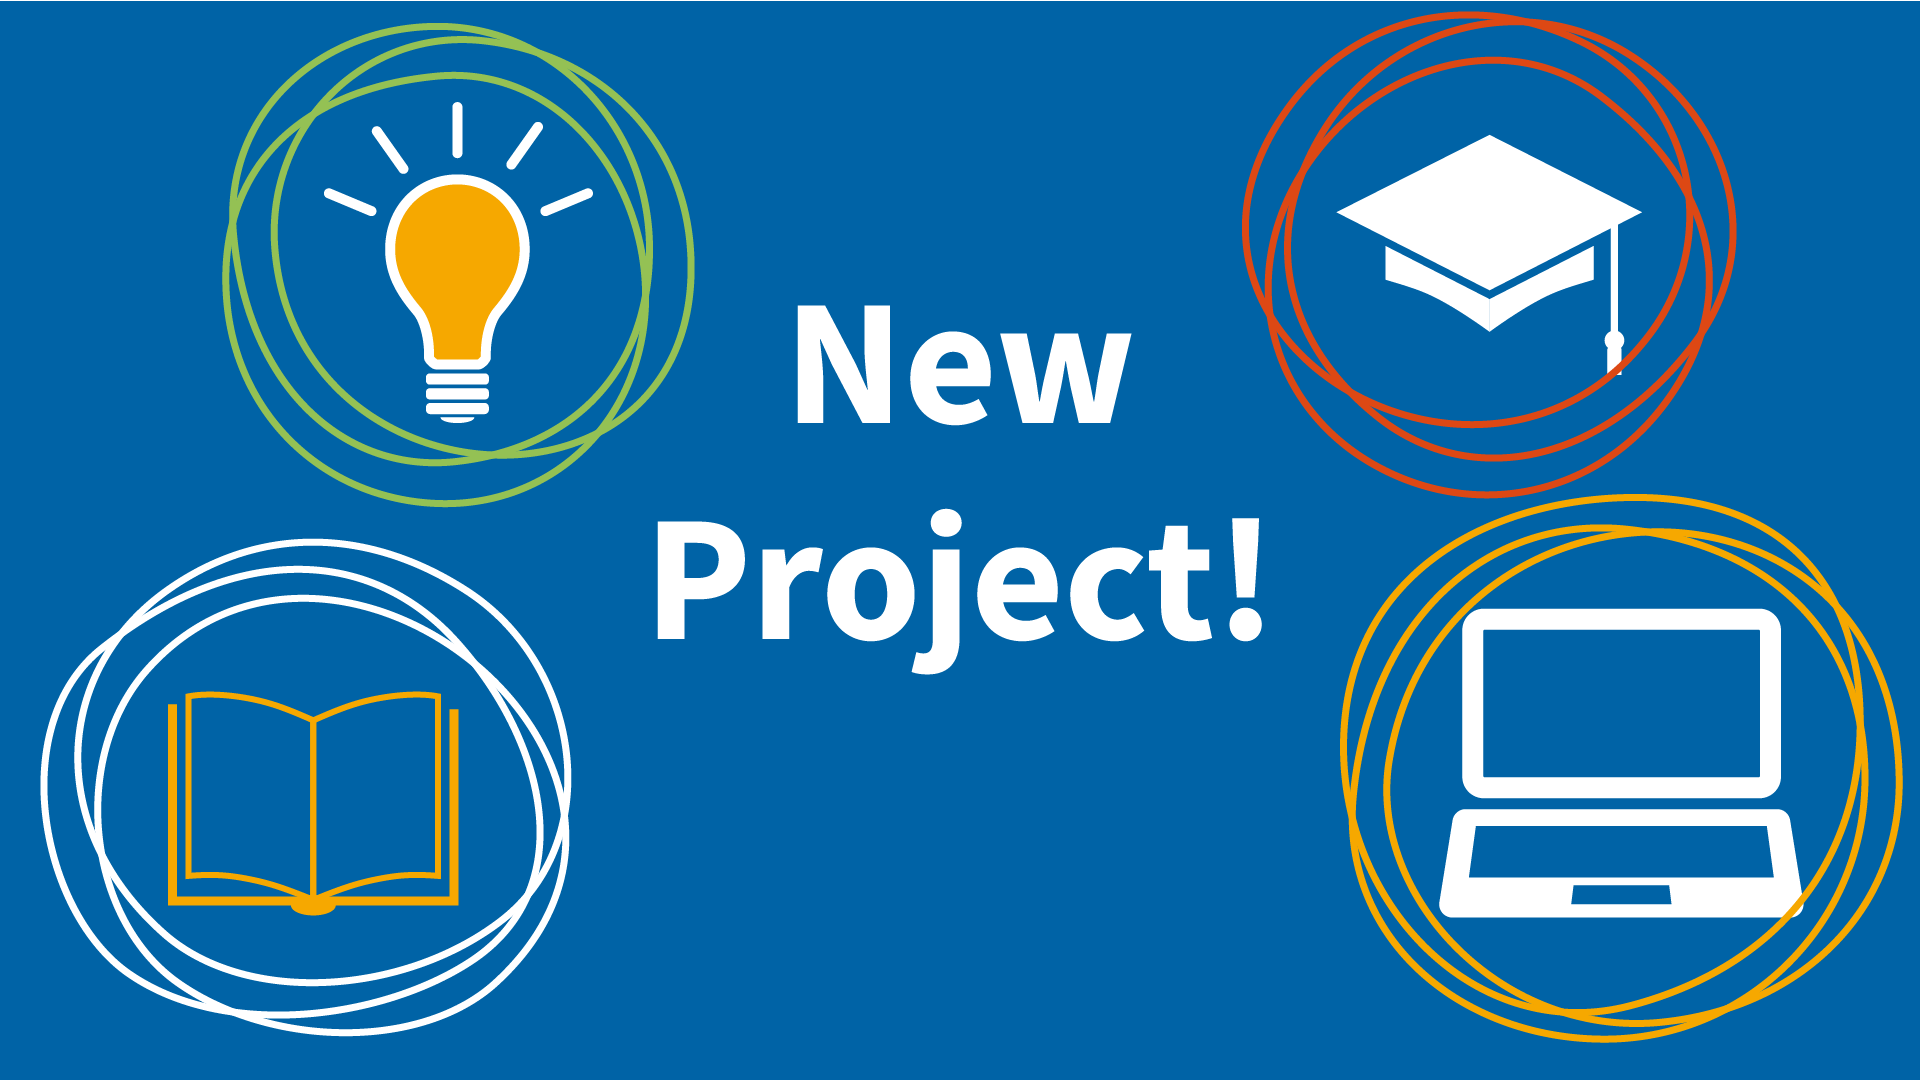 text "New Project!" surrounded by illustrations of a lightbulb, a graduation cap, an open book and an open laptop